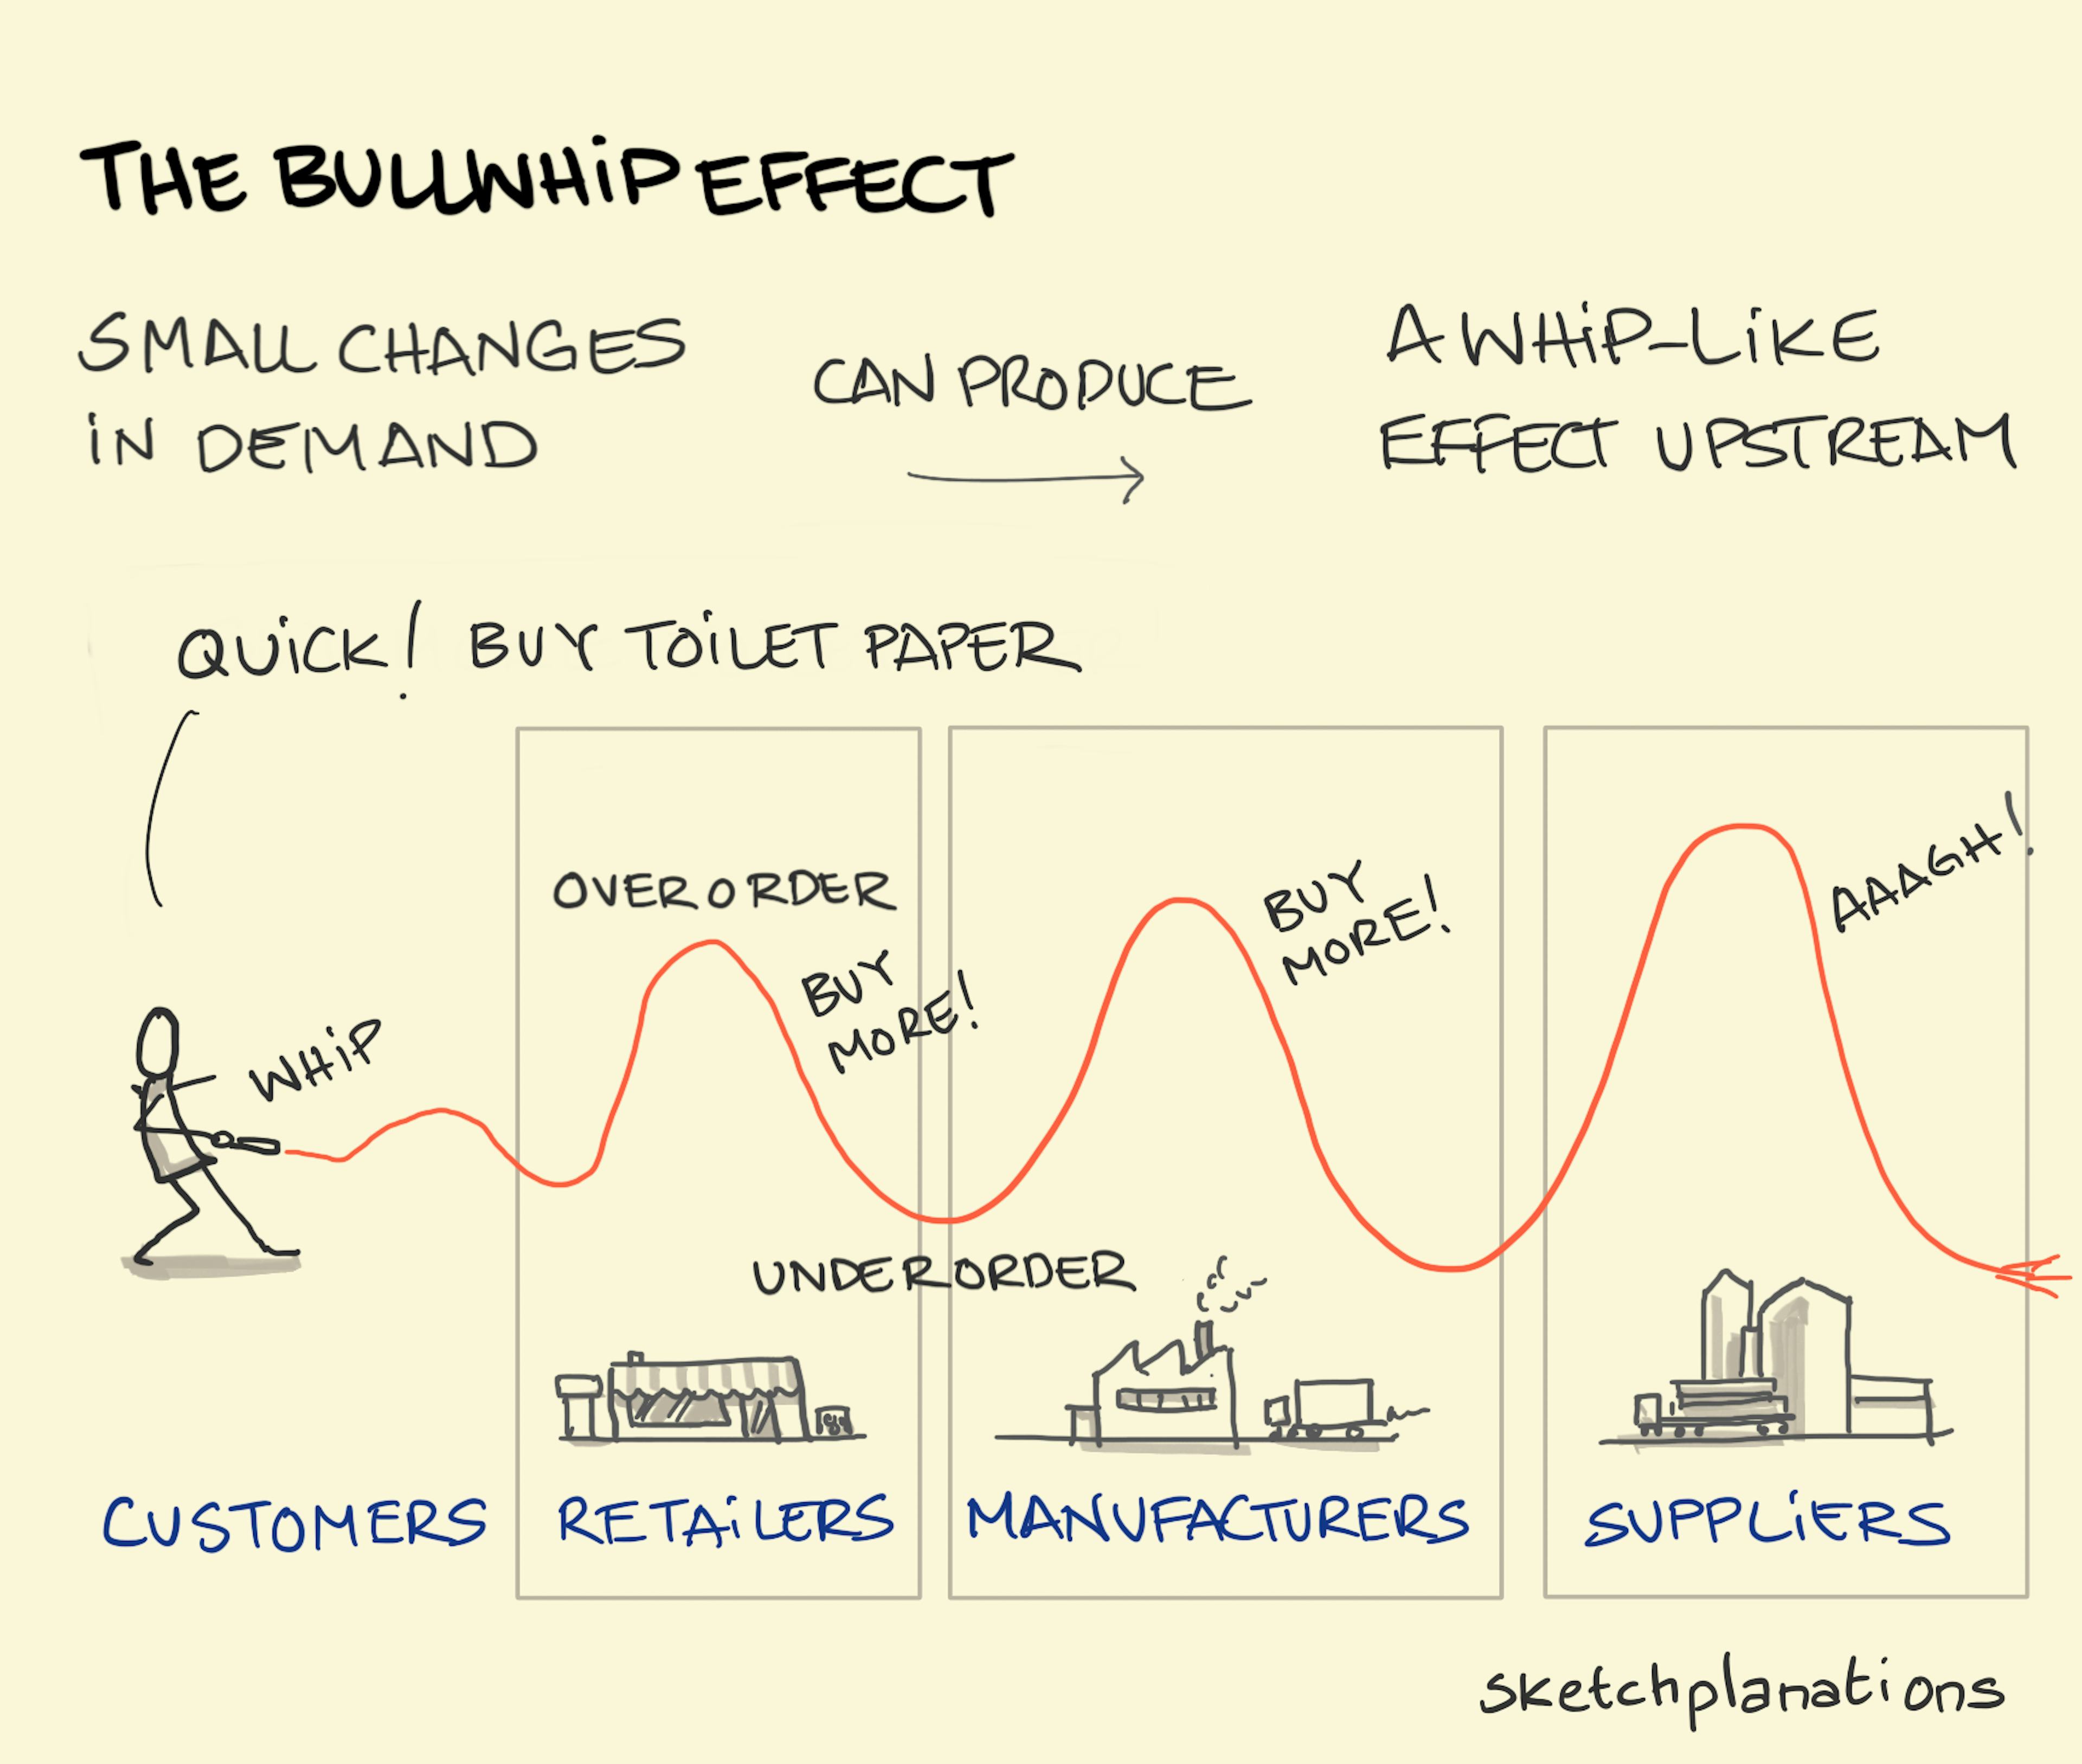 The bullwhip effect: A person whipping a bullwhip showing how the amplitude of shocks increases through retailers, manufacturers and suppliers